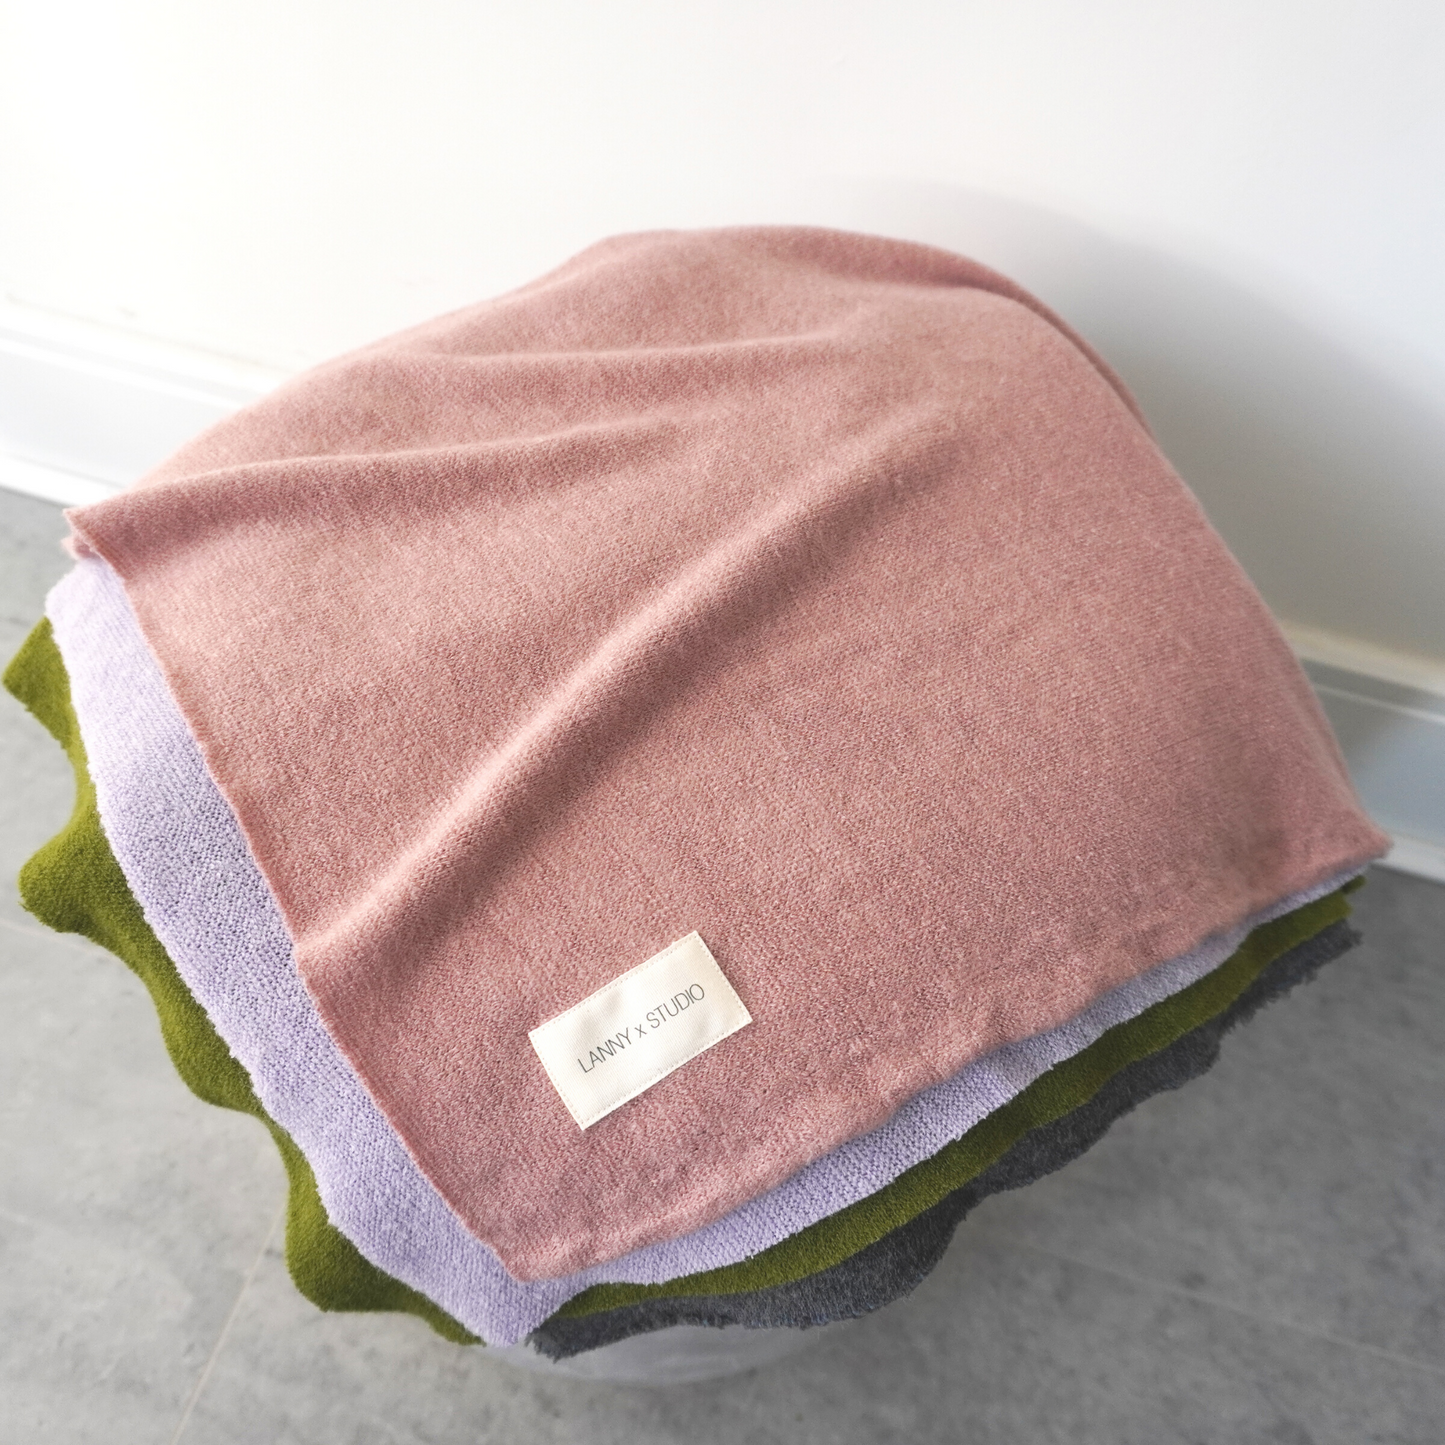 Pink, Green, Lilac and charcoal colour block throw in knit fabric with LannyxStudio Branded label. View from top folded. 